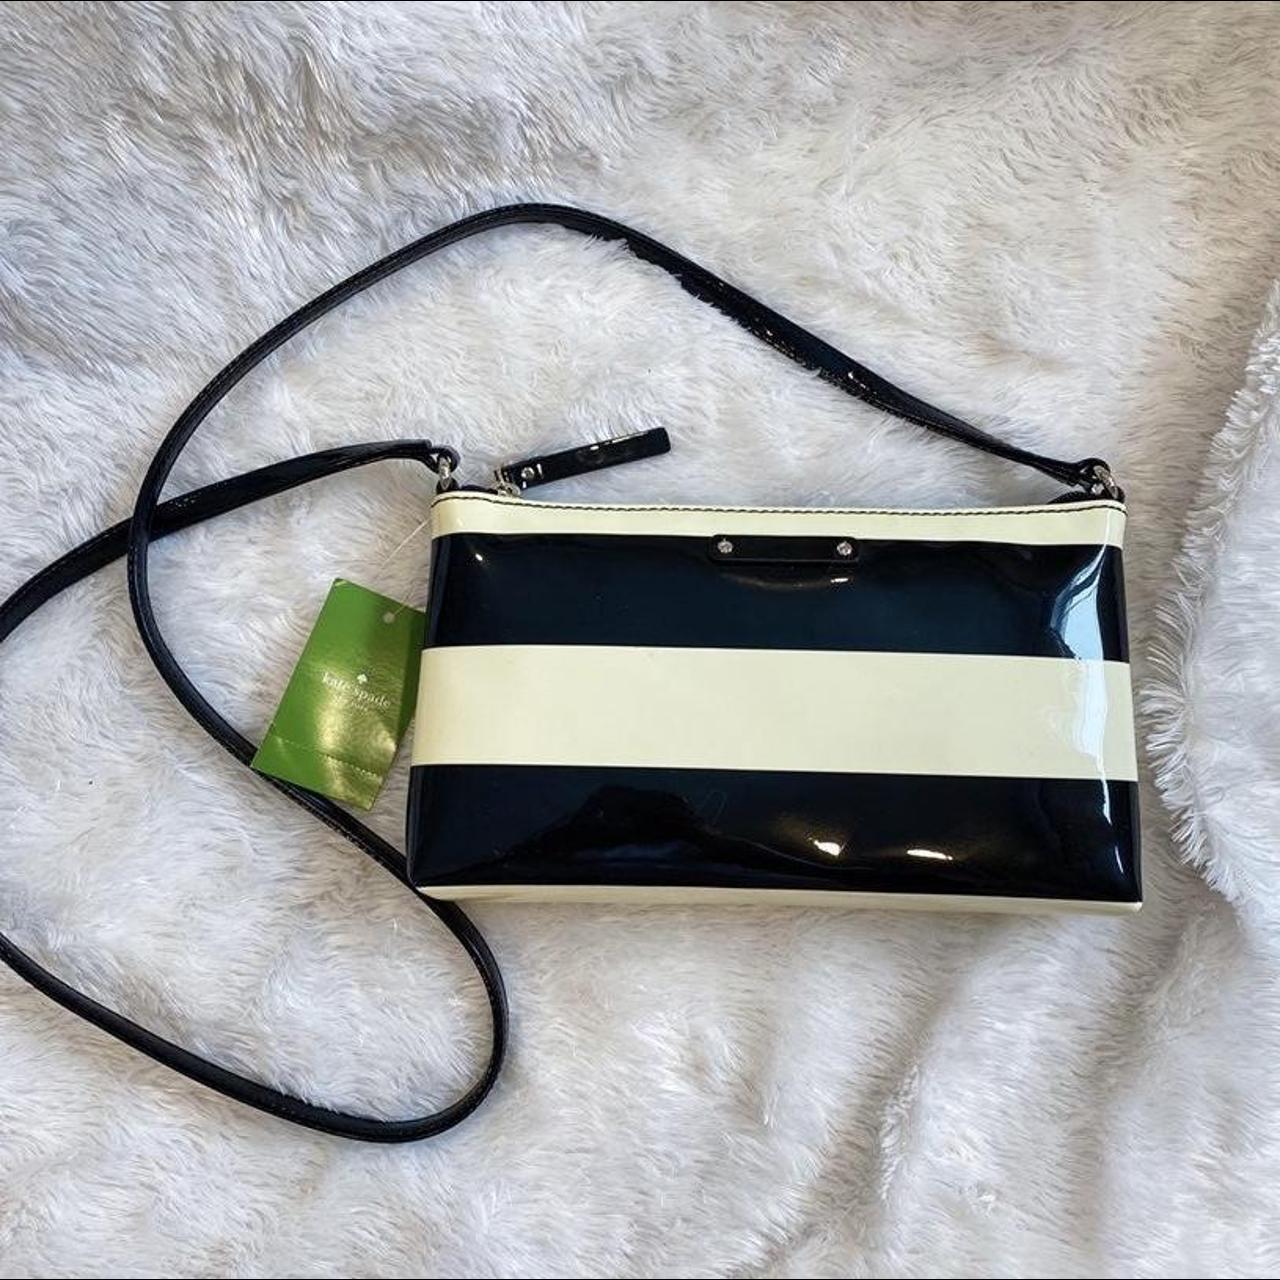 Let's Do A Kate Spade Knott Bag Review! - Fashion For Lunch